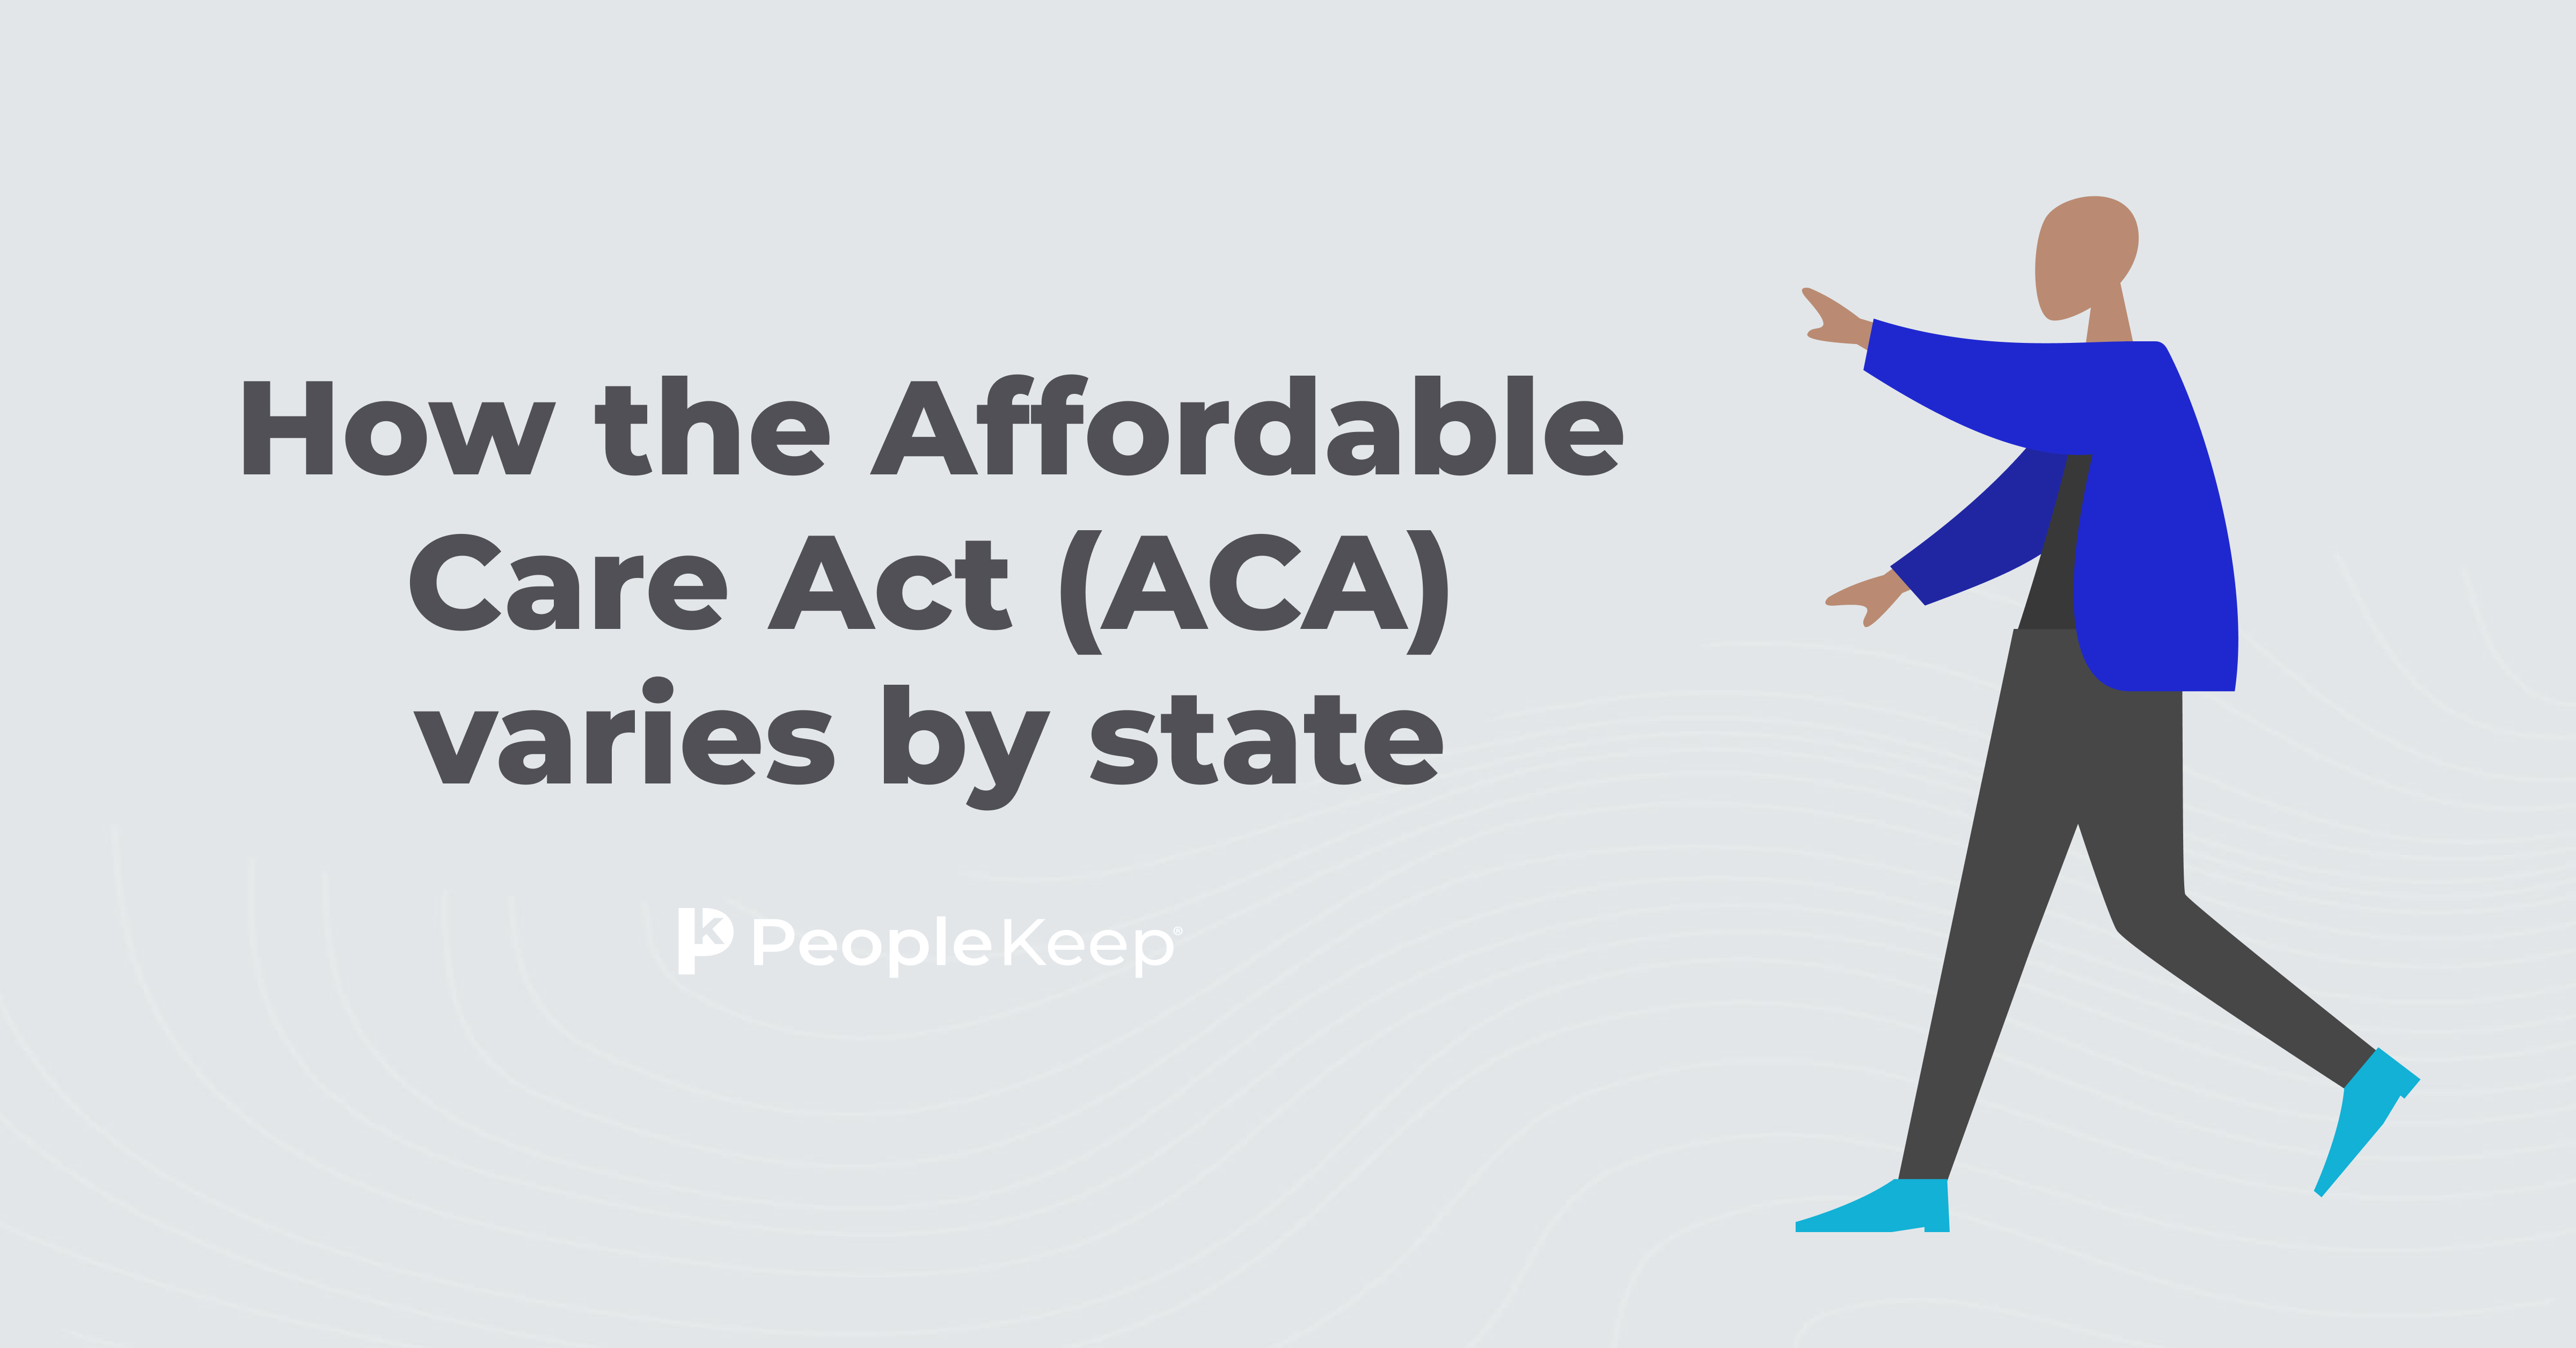 How the Affordable Care Act (ACA) varies by state